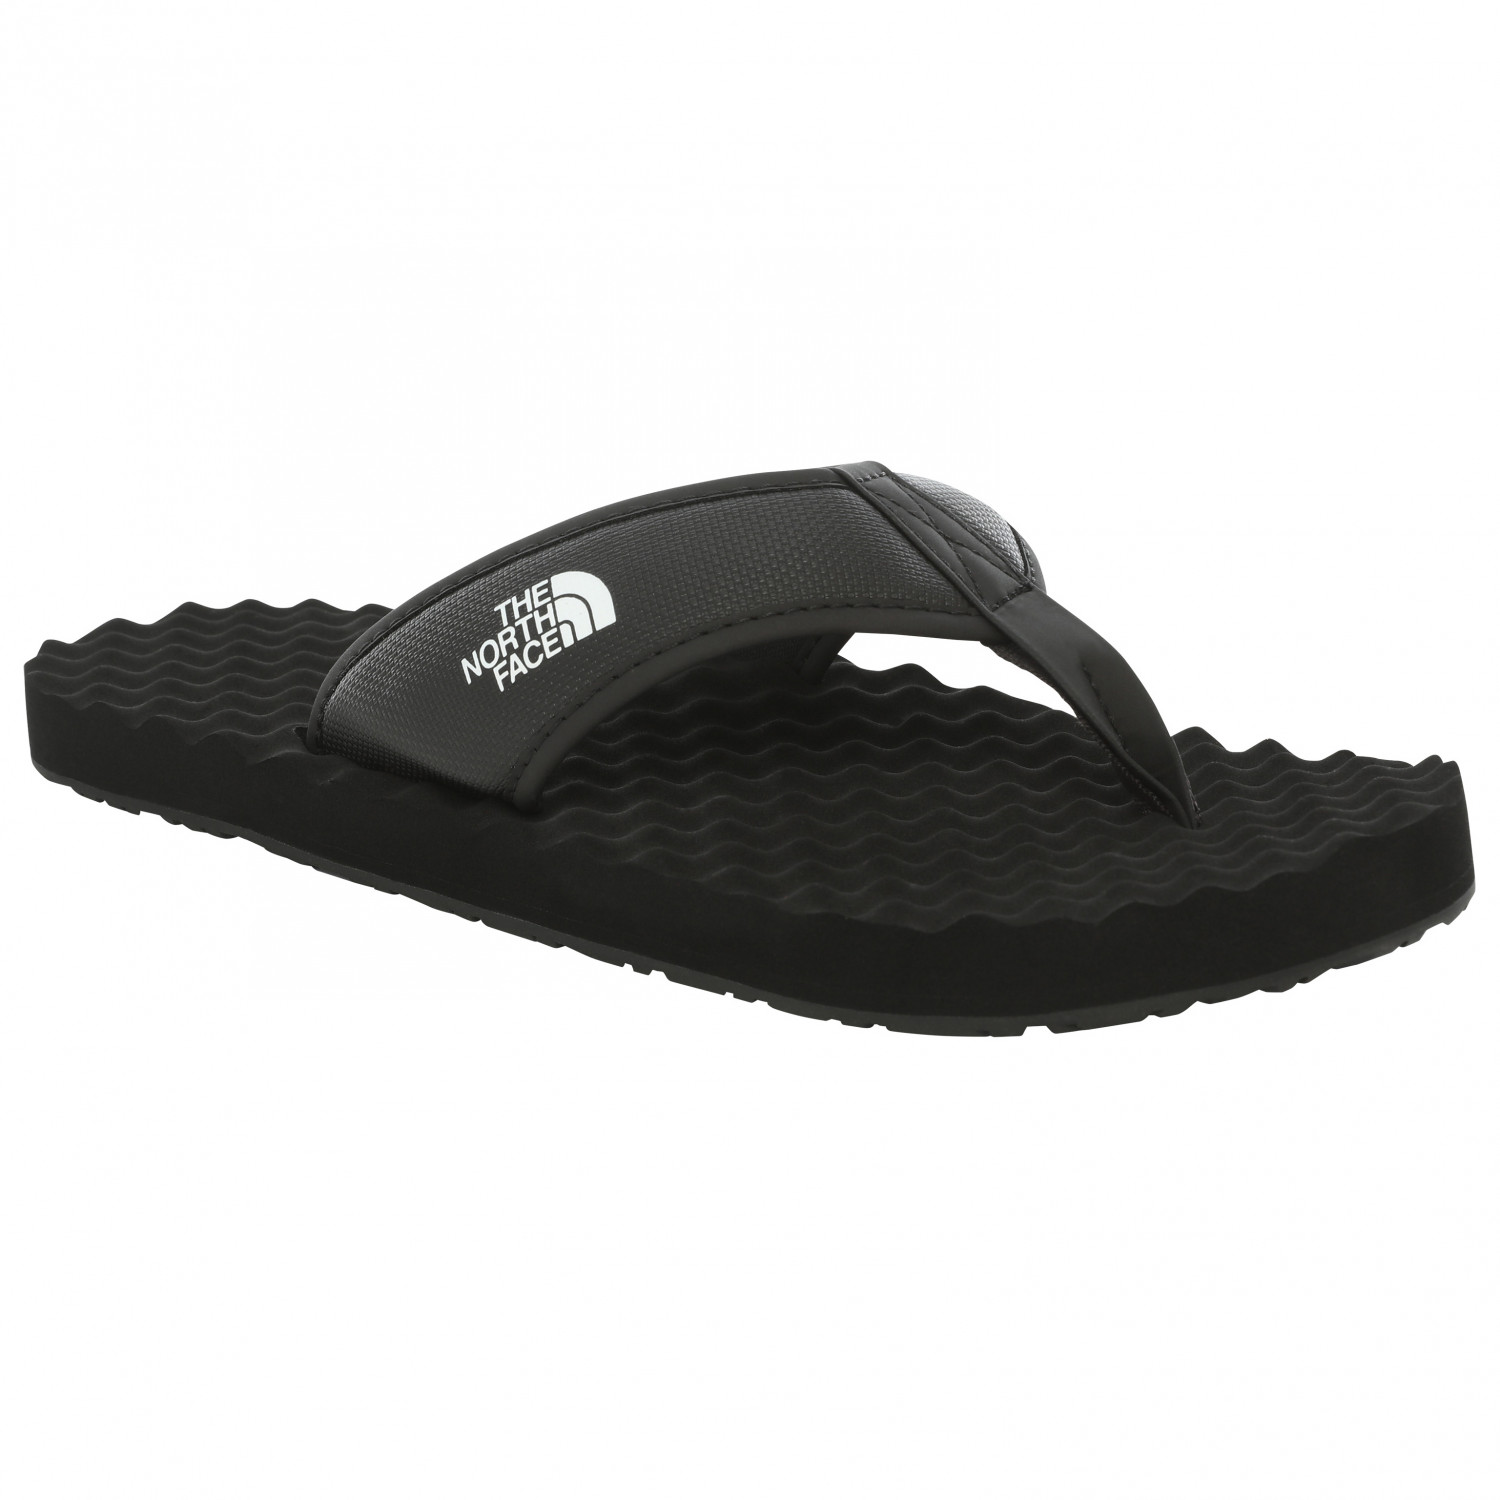 Сандалии The North Face Basecamp Zehensandale II, цвет TNF Black/TNF White byqdy clear transparent pvc sandals narrow band woman shoes pinch ankle buckle open toe sandals with flat heels sandals women 40